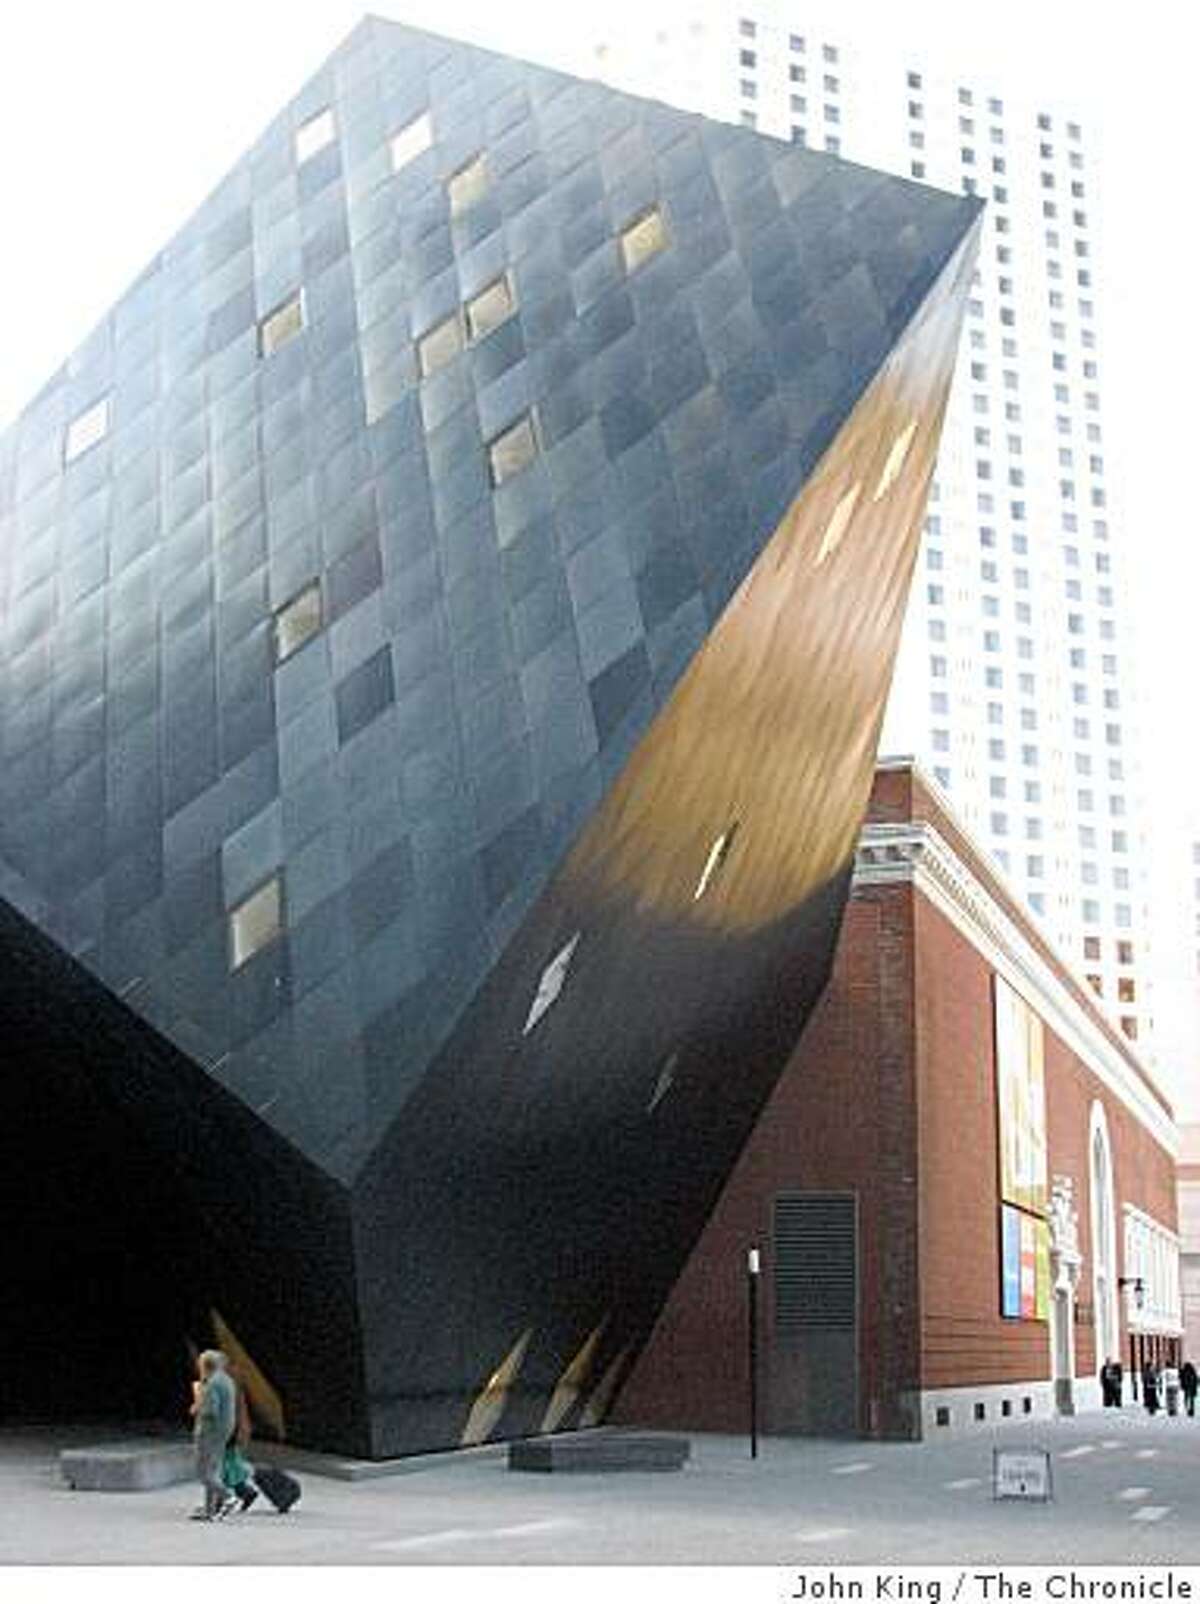 The Contemporary Jewish Museum, a building in San Francisco that shows the old and new can blend.